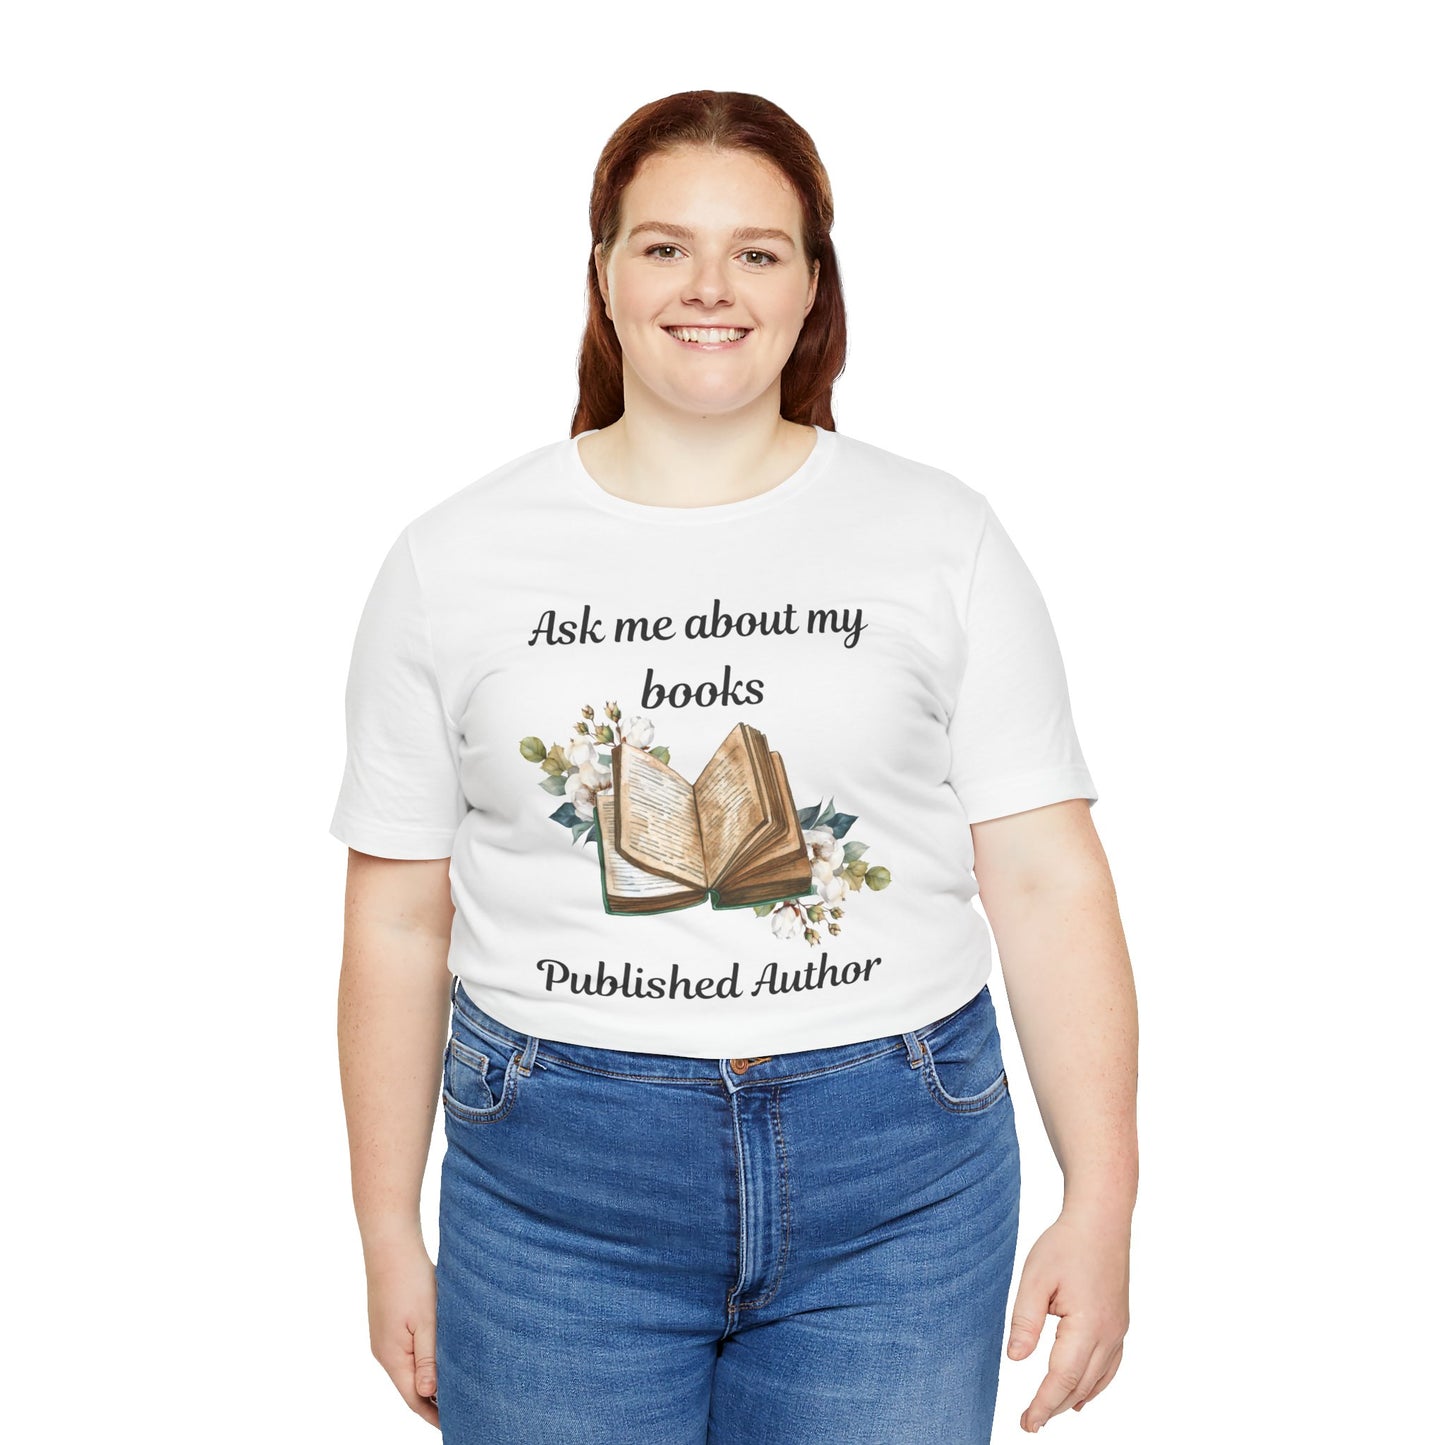 Ask me about my books - Published Author Tee Shirt